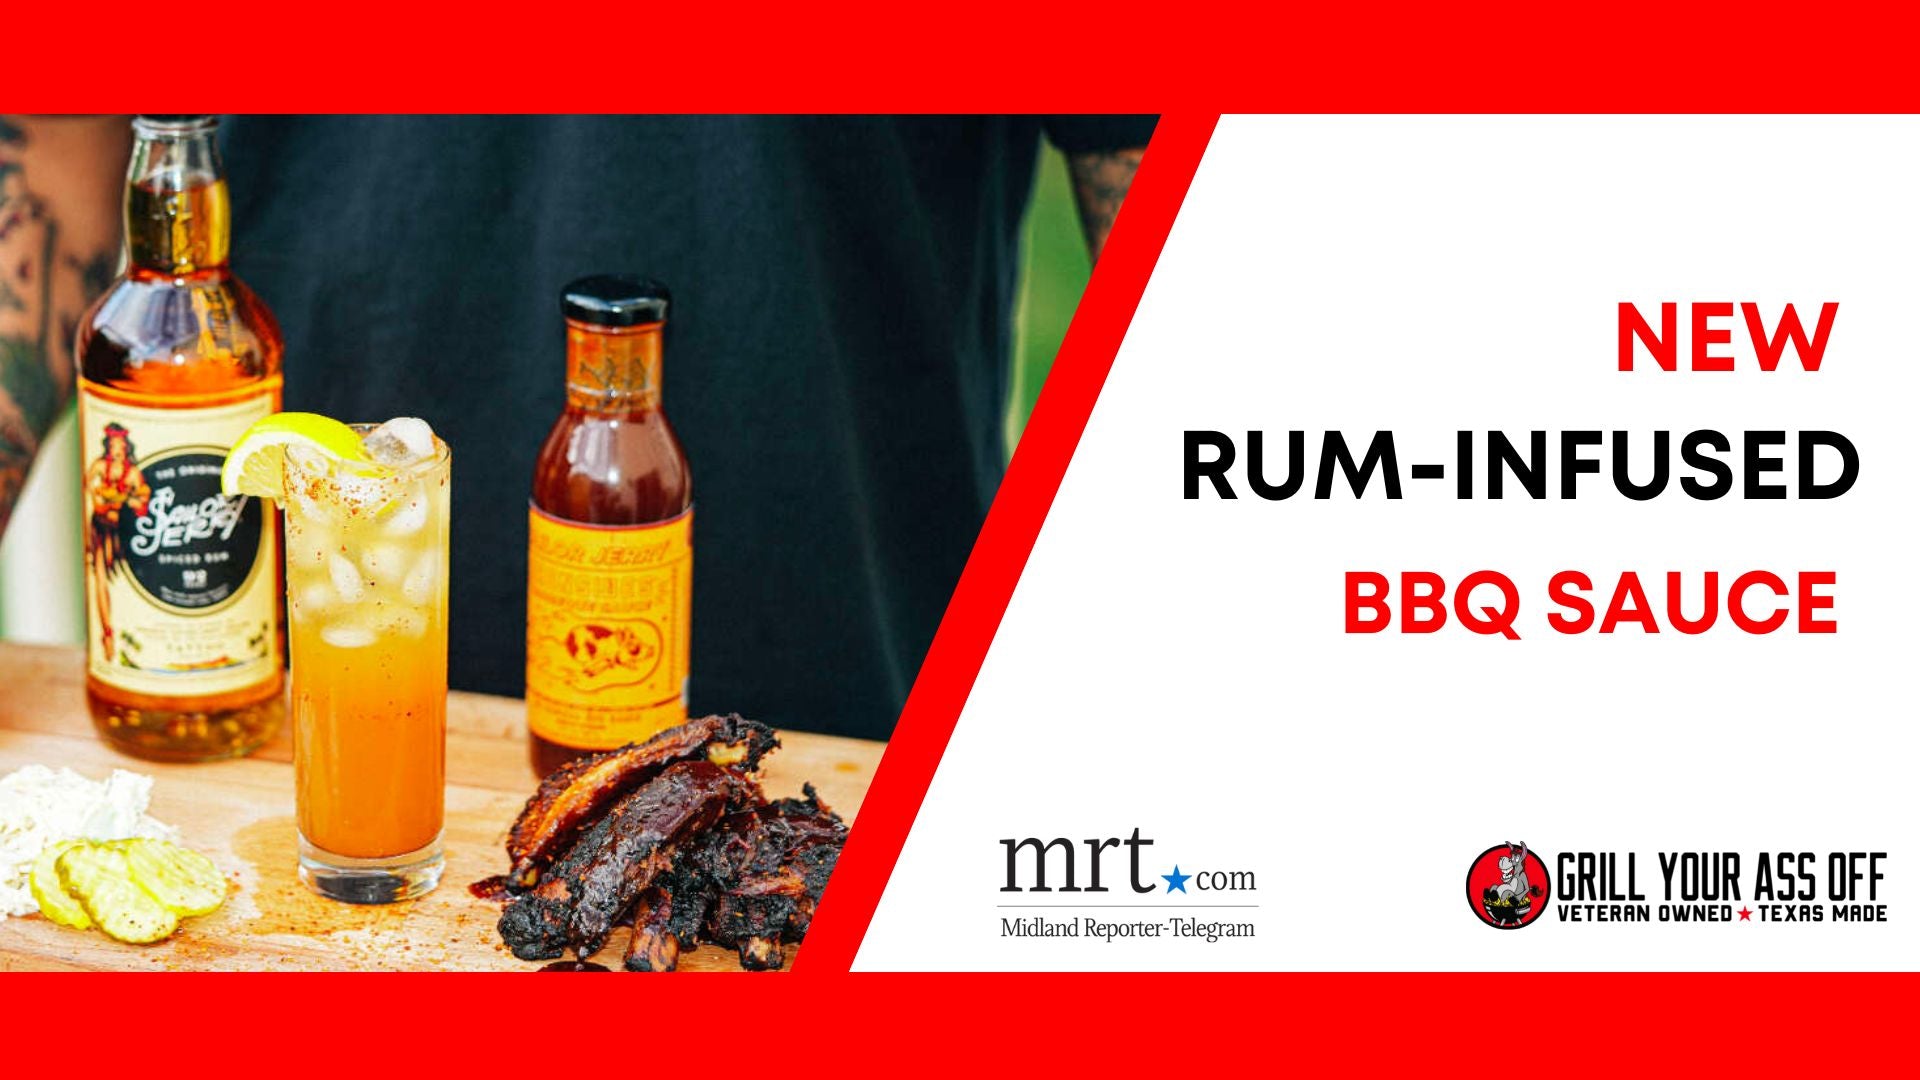 Midland Reporter-Telegram: New Rum-Infused Texas BBQ Sauce Aims To Support Vets